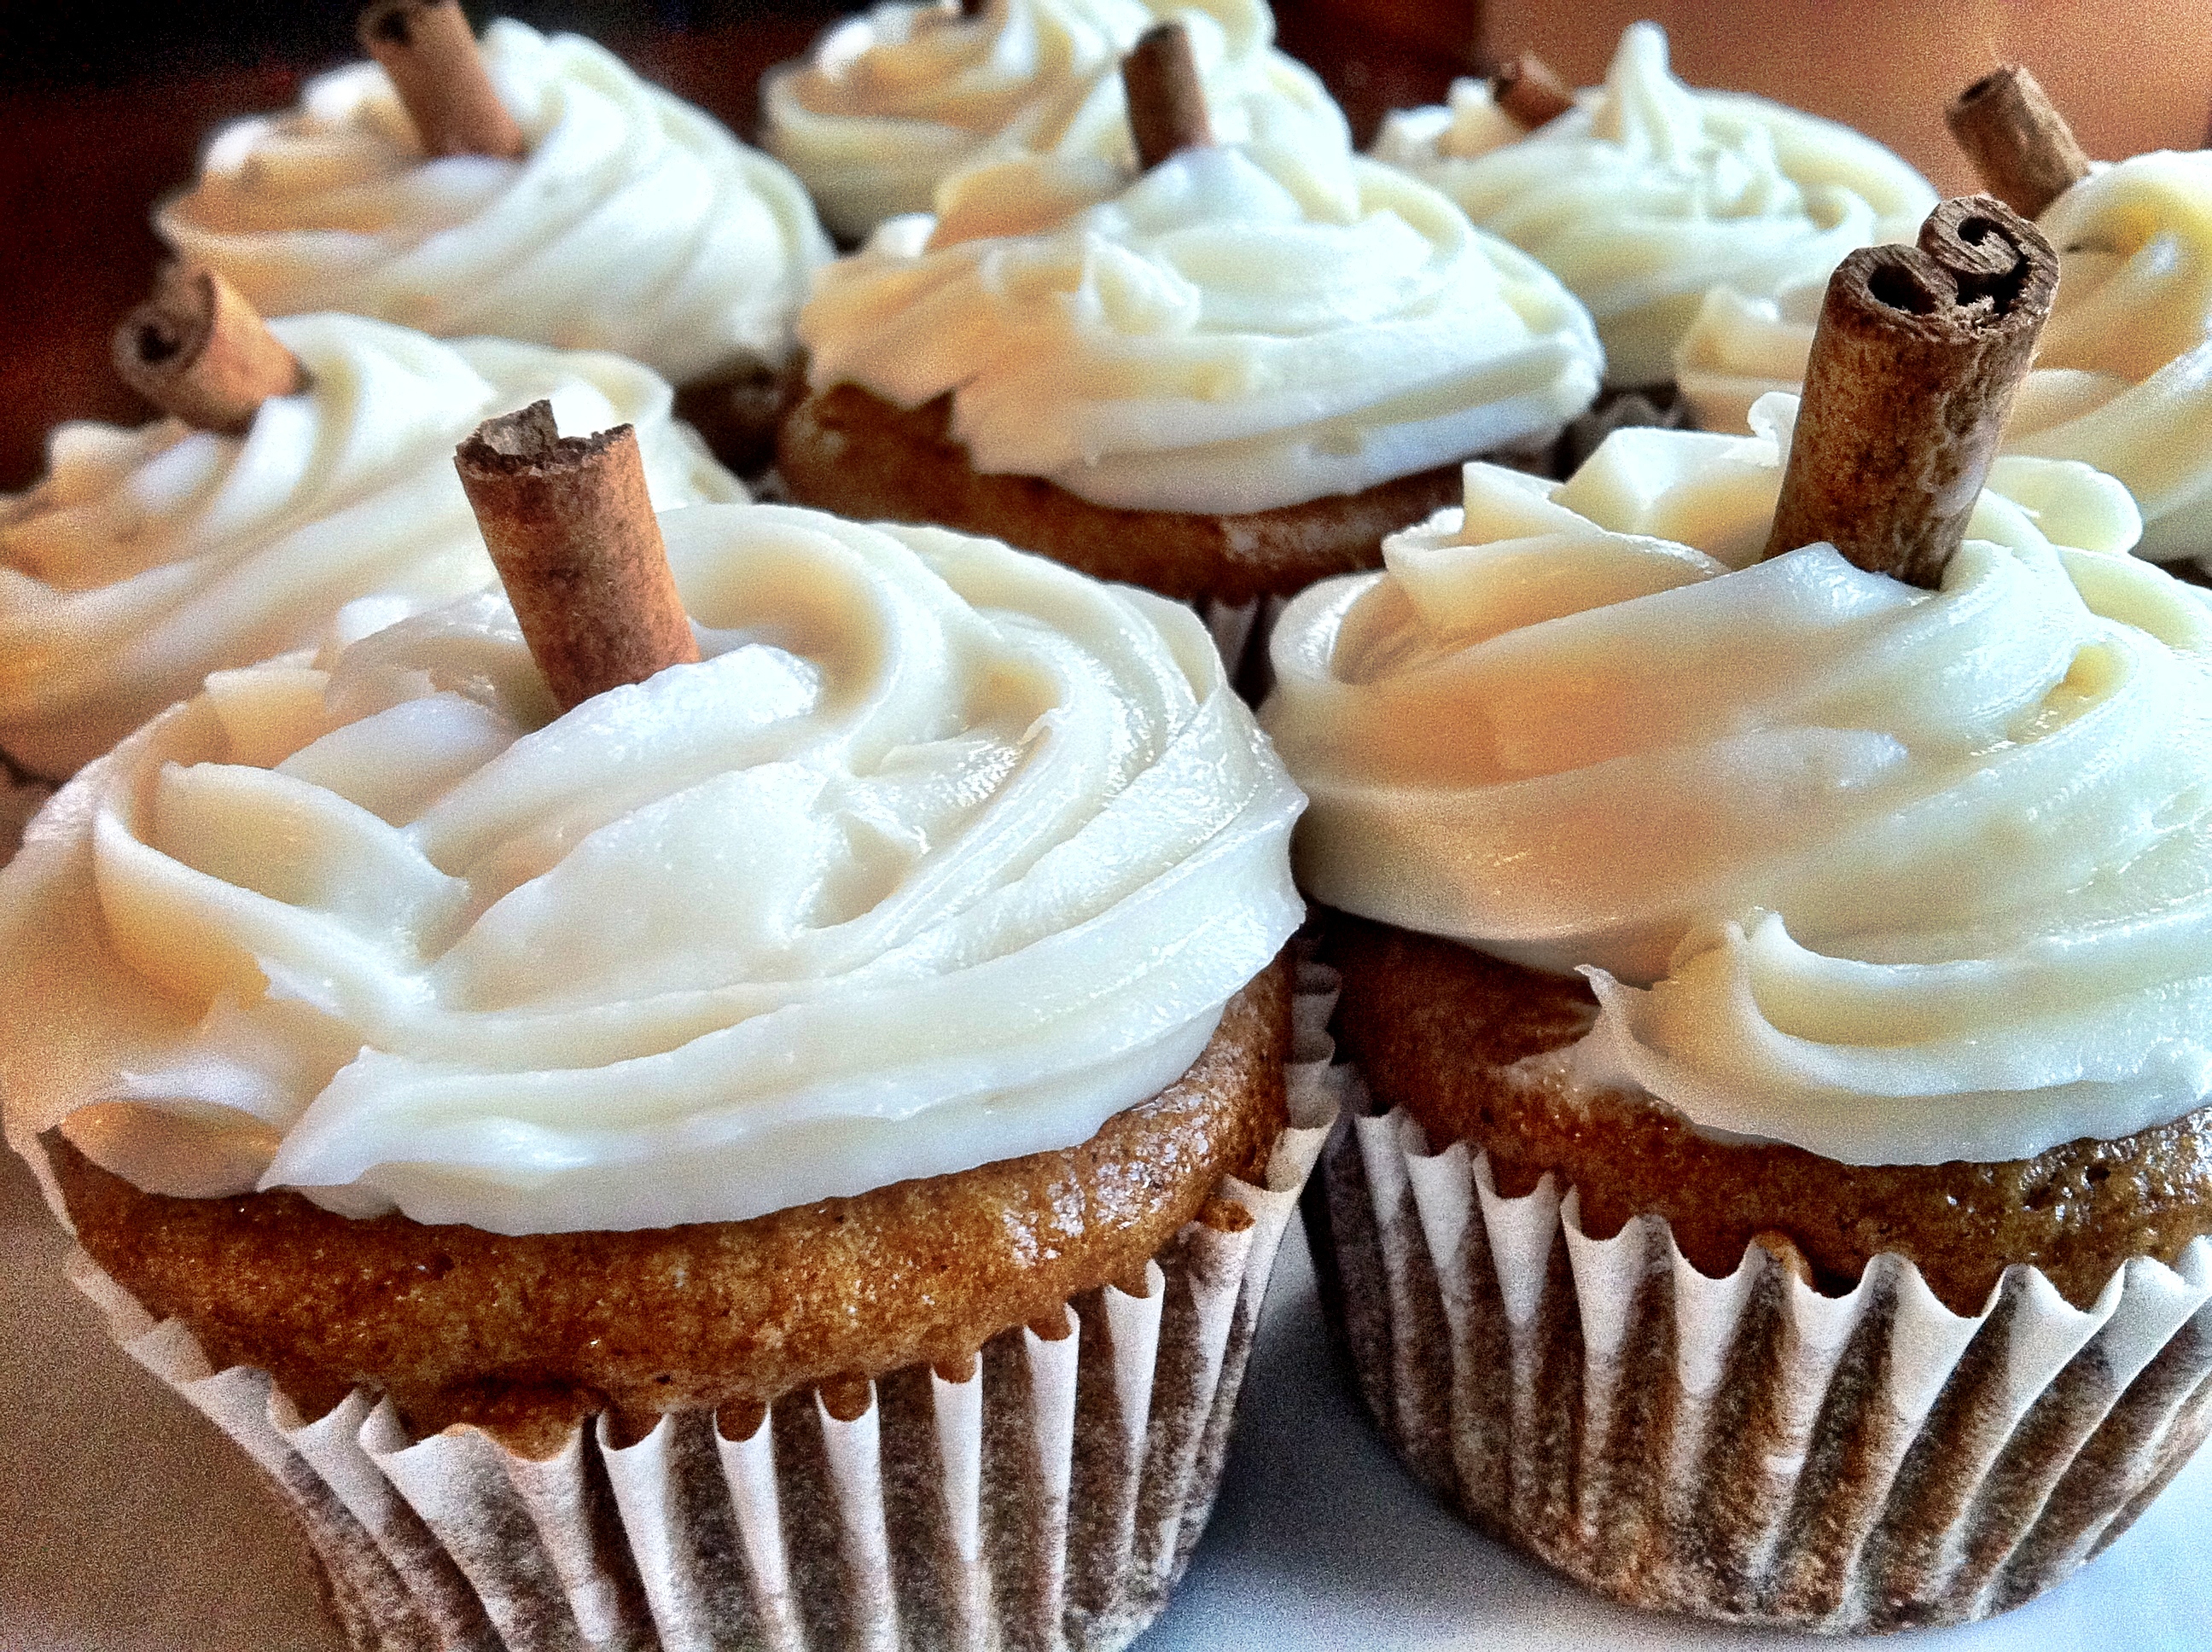 Vegan pumpking spice cupcakes with %22cream cheese%22 frosting